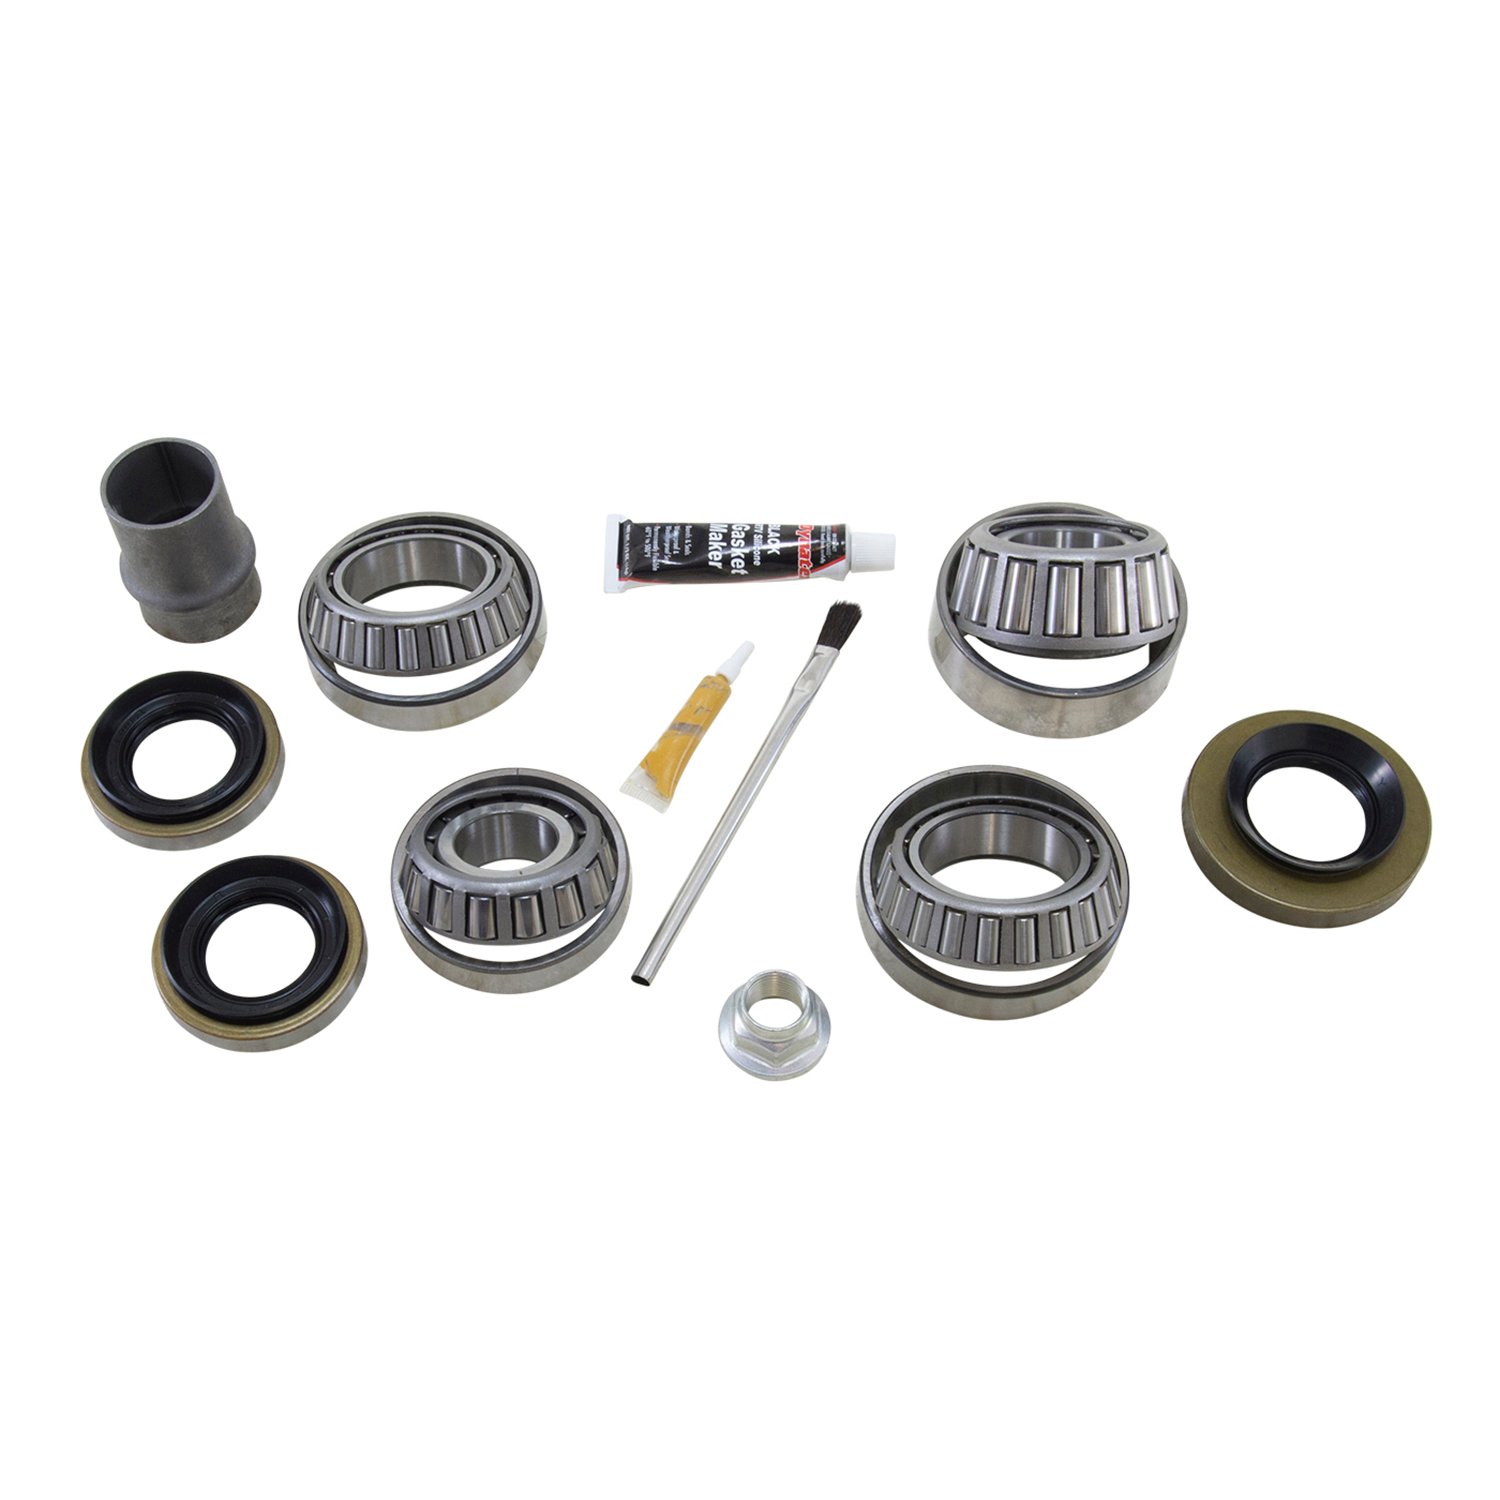 Bearing Install Kit For Toyota 7.5 in. Ifs Differential, For V6 Only